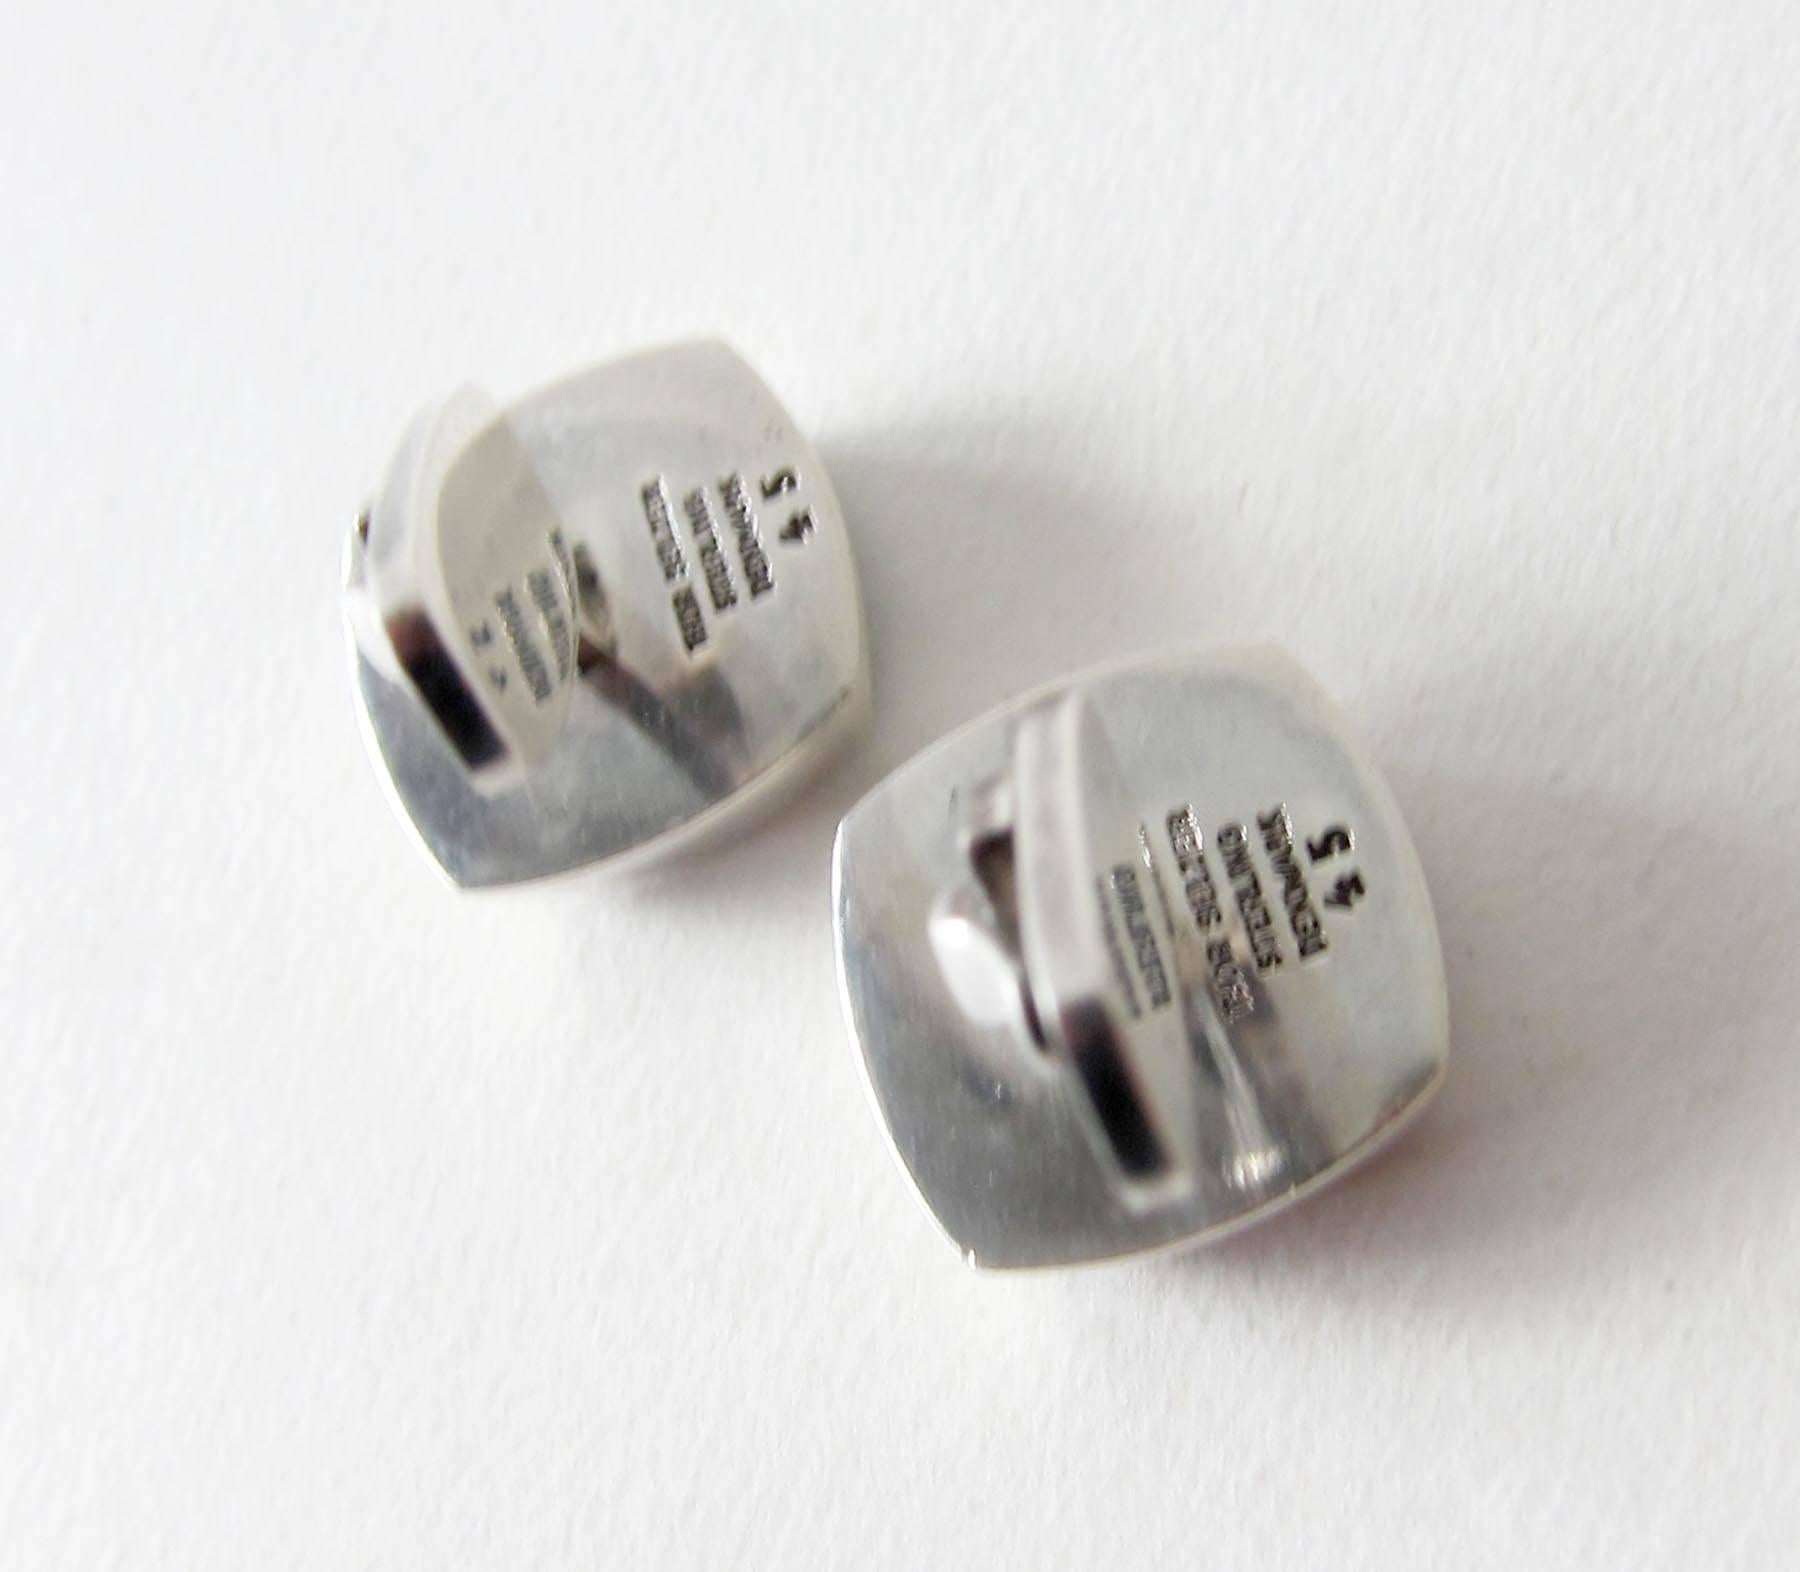 Sterling silver geometric modern cufflinks created by Thor Selzer of Denmark.  Cufflinks measure about 1/2